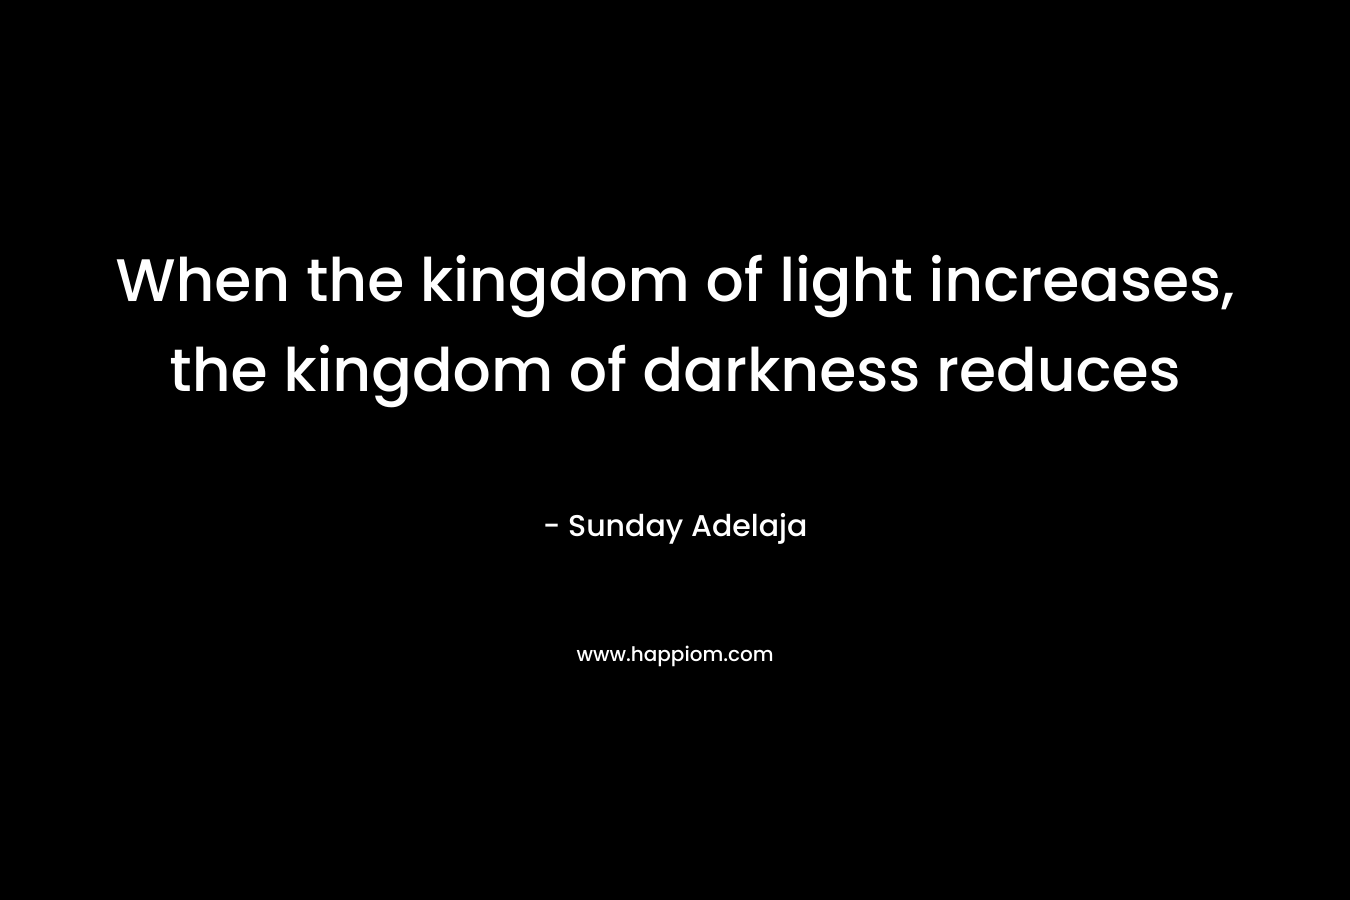 When the kingdom of light increases, the kingdom of darkness reduces